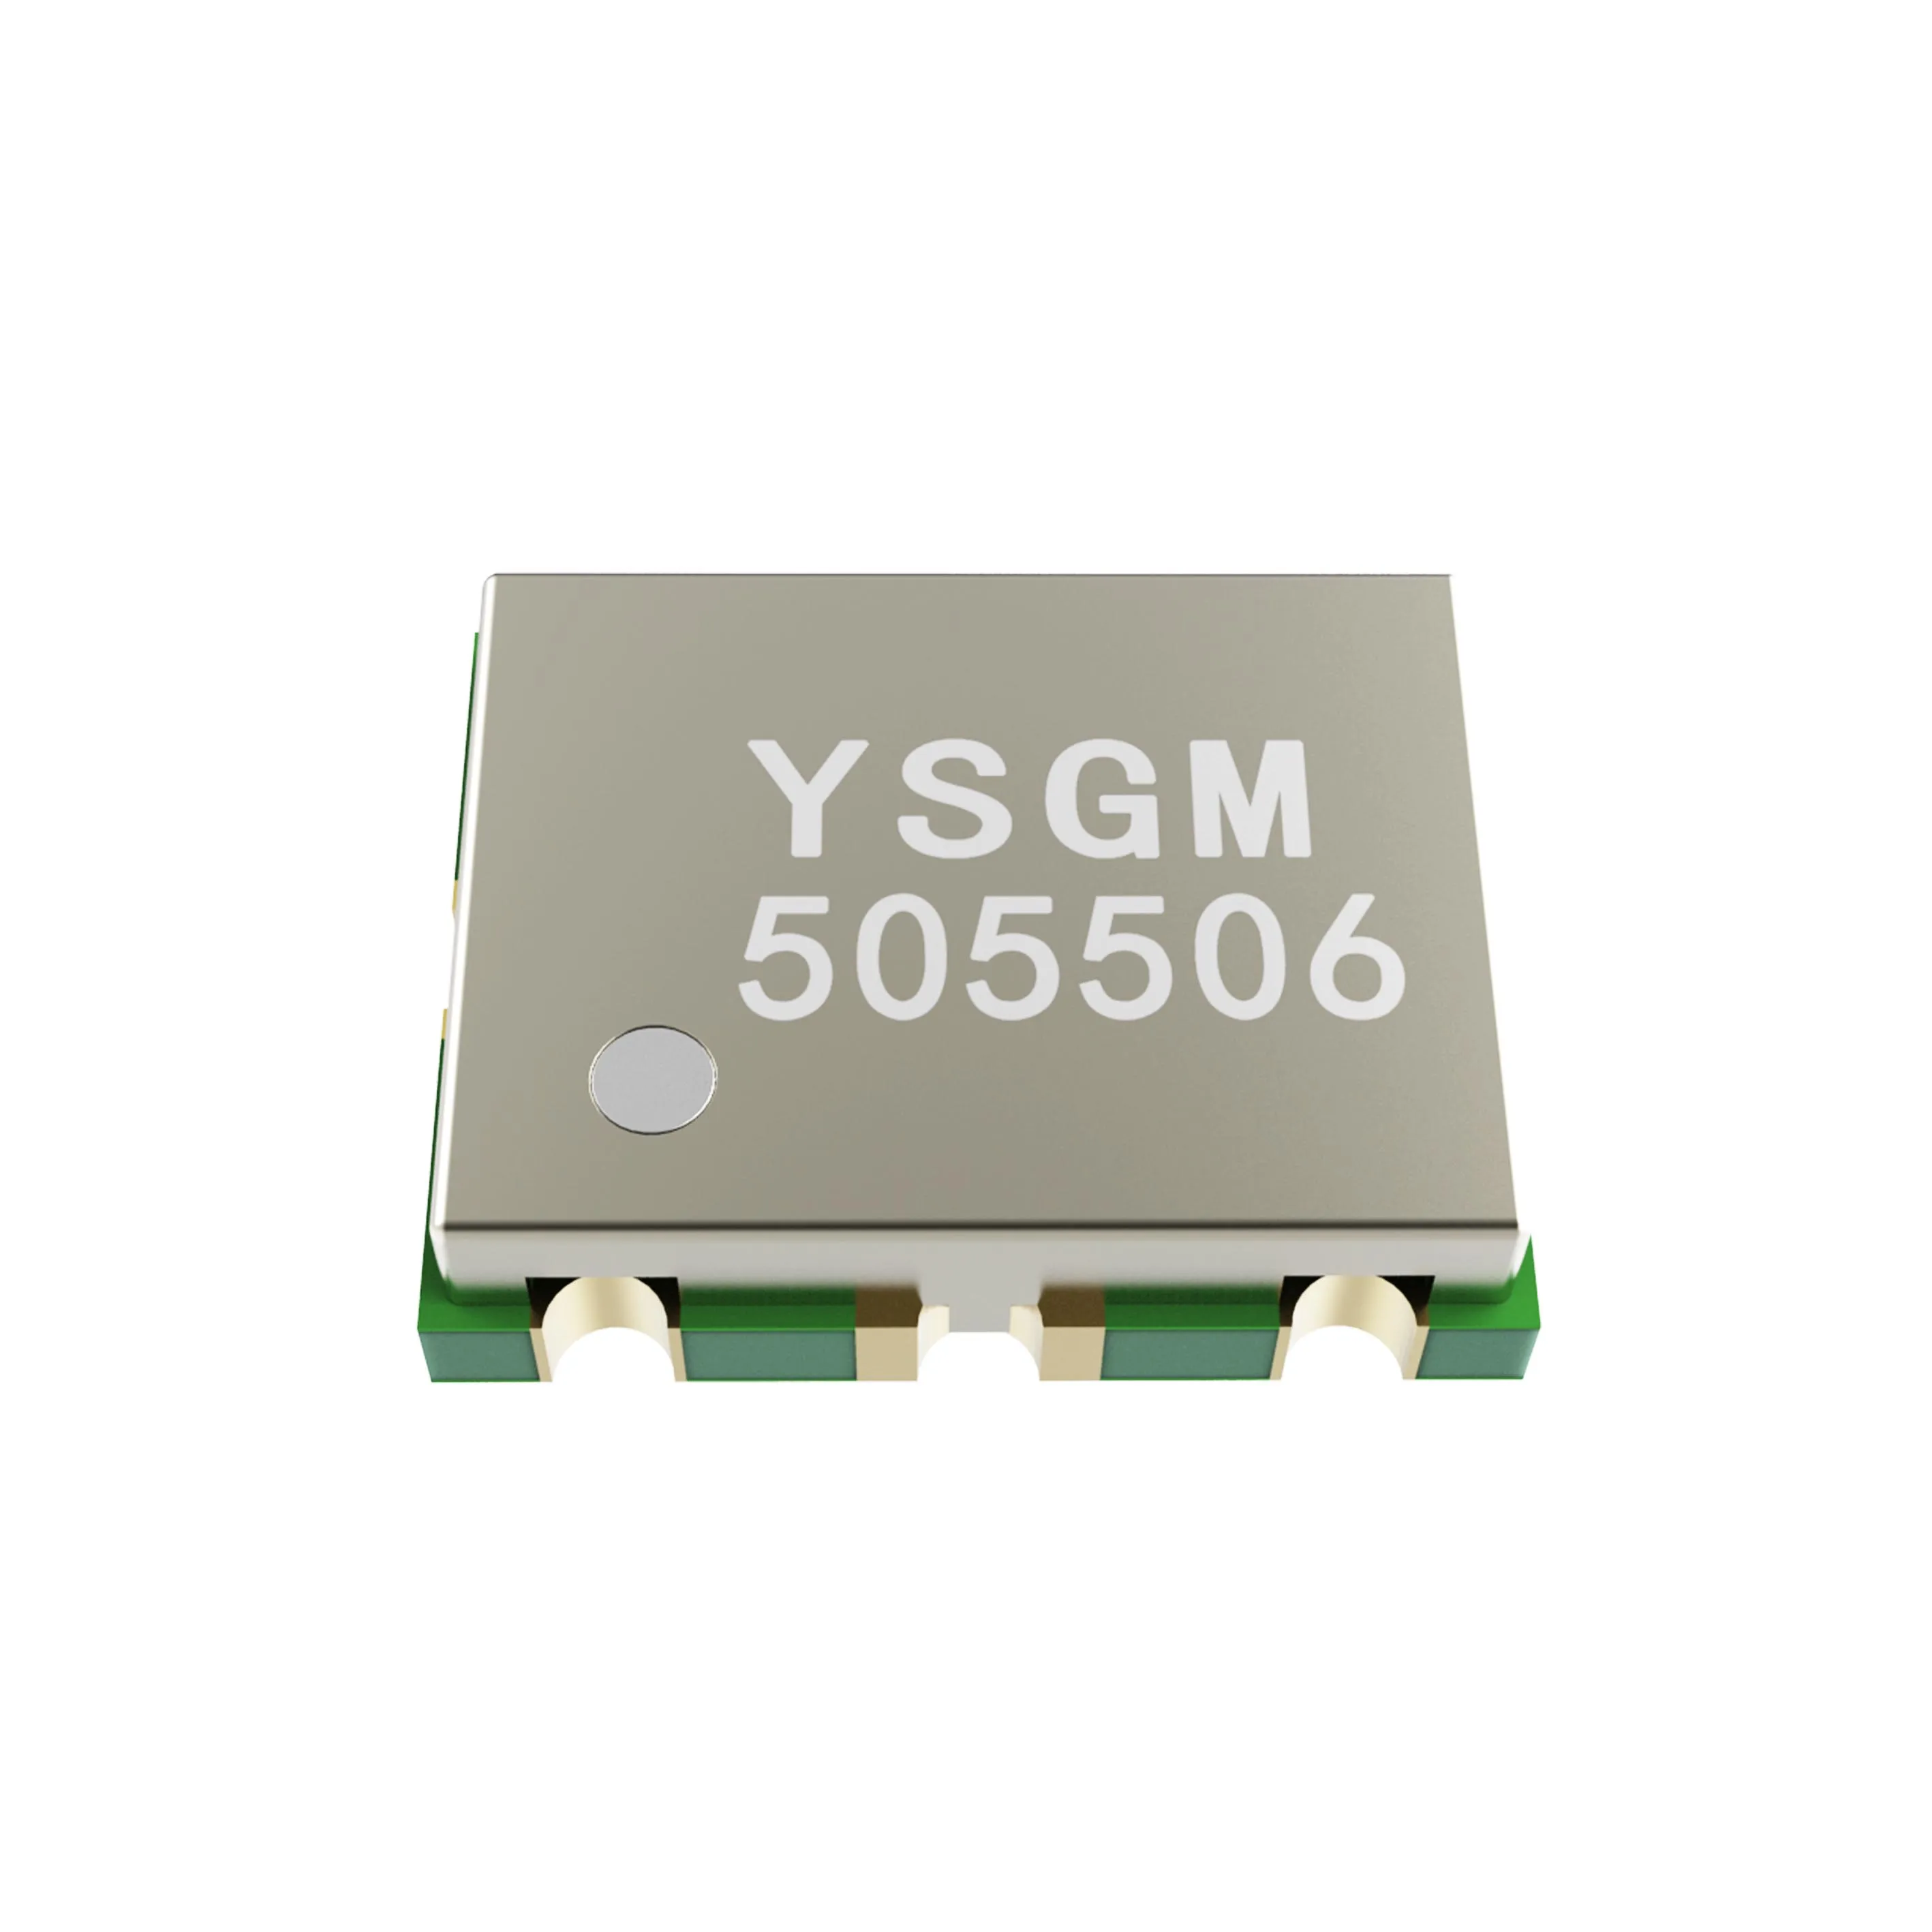 VCO Voltage Controlled Oscillator with Buffer Amplifier for IEEE 802.11a/n/ac 5150MHz-5350MHz